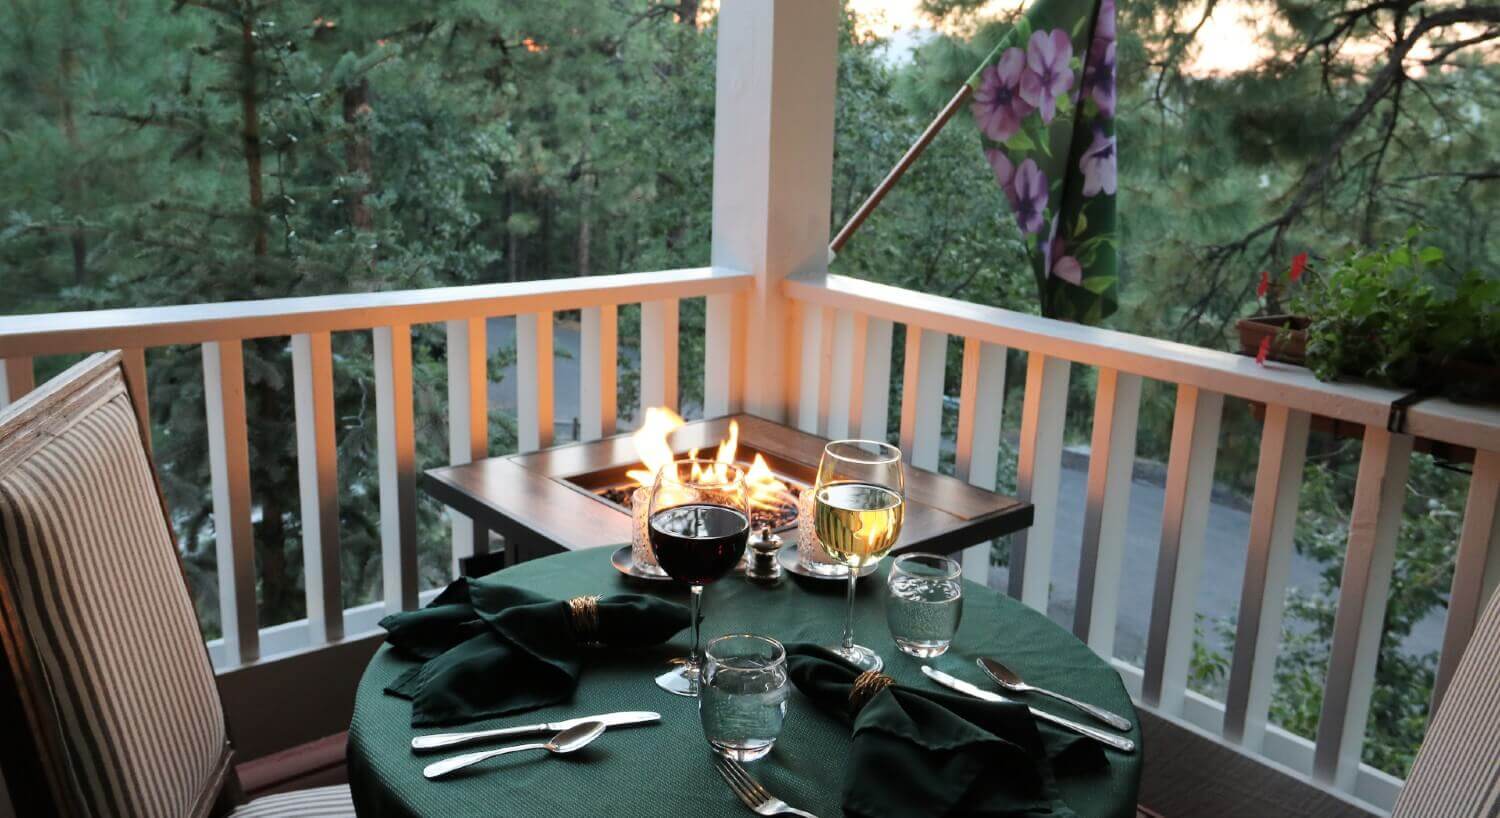 balcony table set with green linens and wine glasses, striped upholstered chairs with fire pit burning in the corner